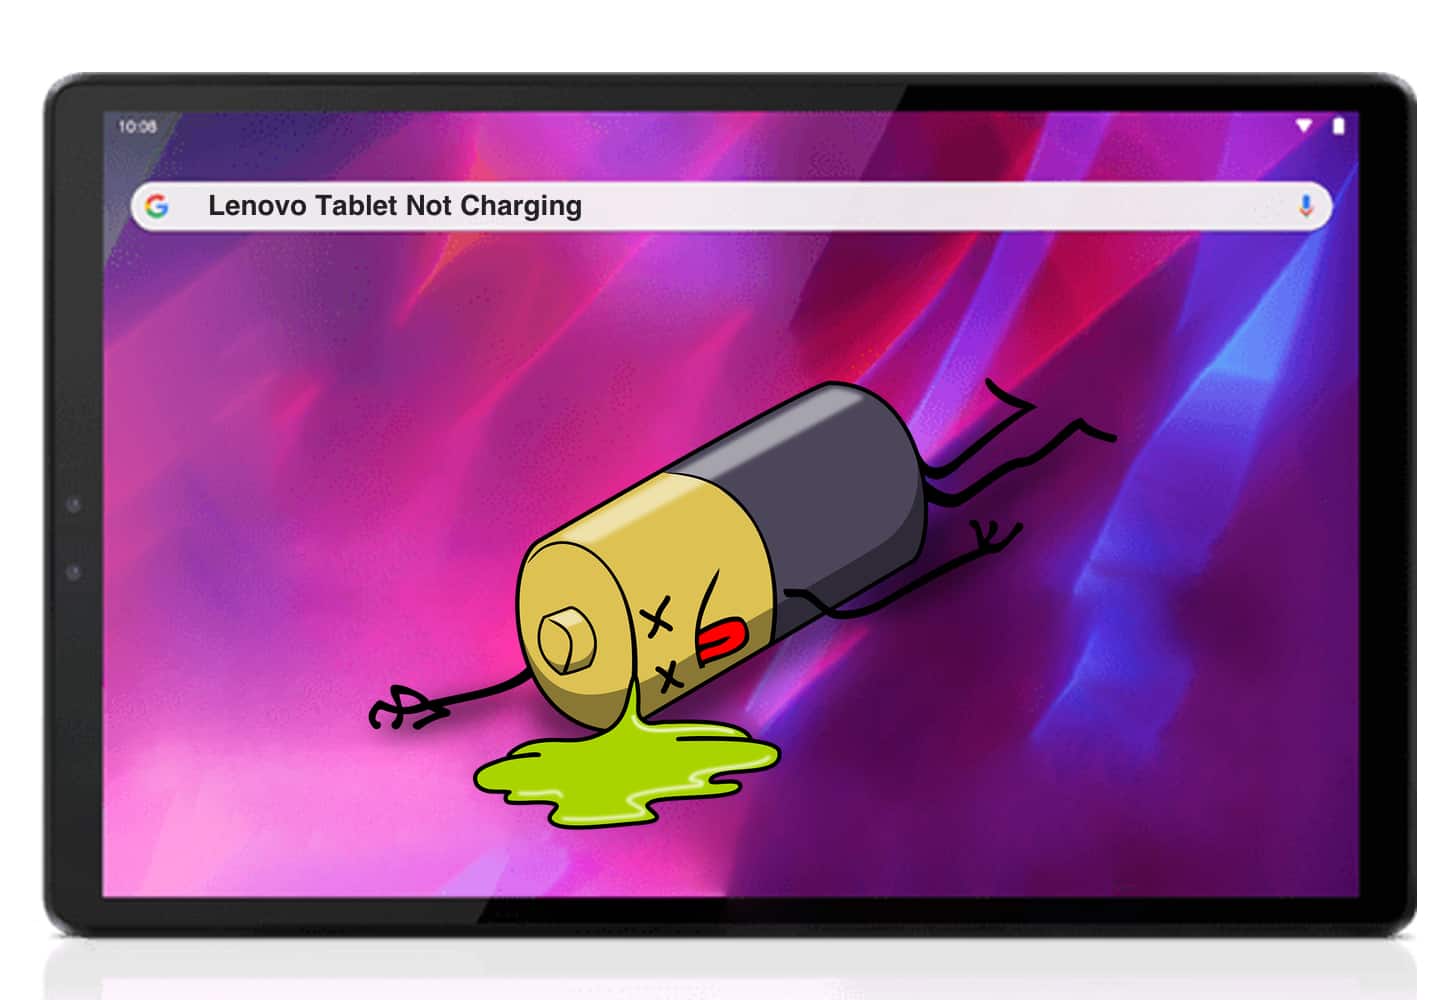 Lenovo Tablet Not Charging: How to fix - WorldofTablet